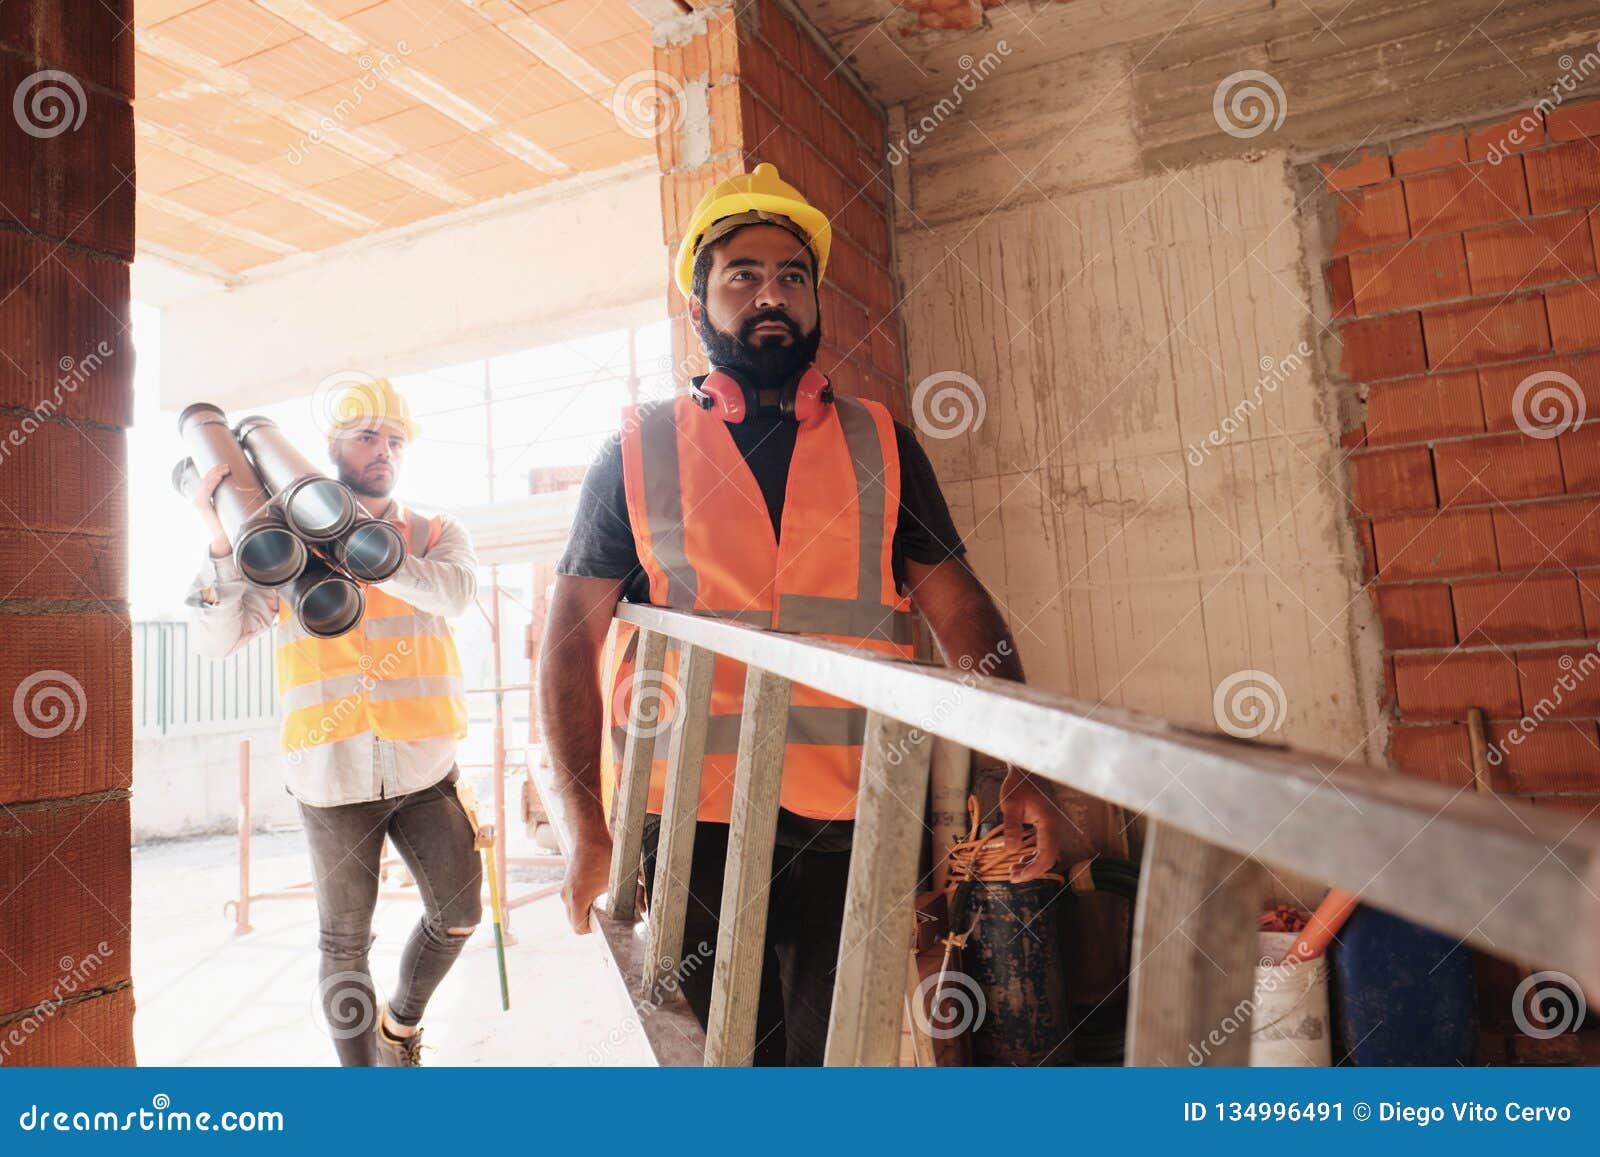 workers in construction site using tools and heavy equipment